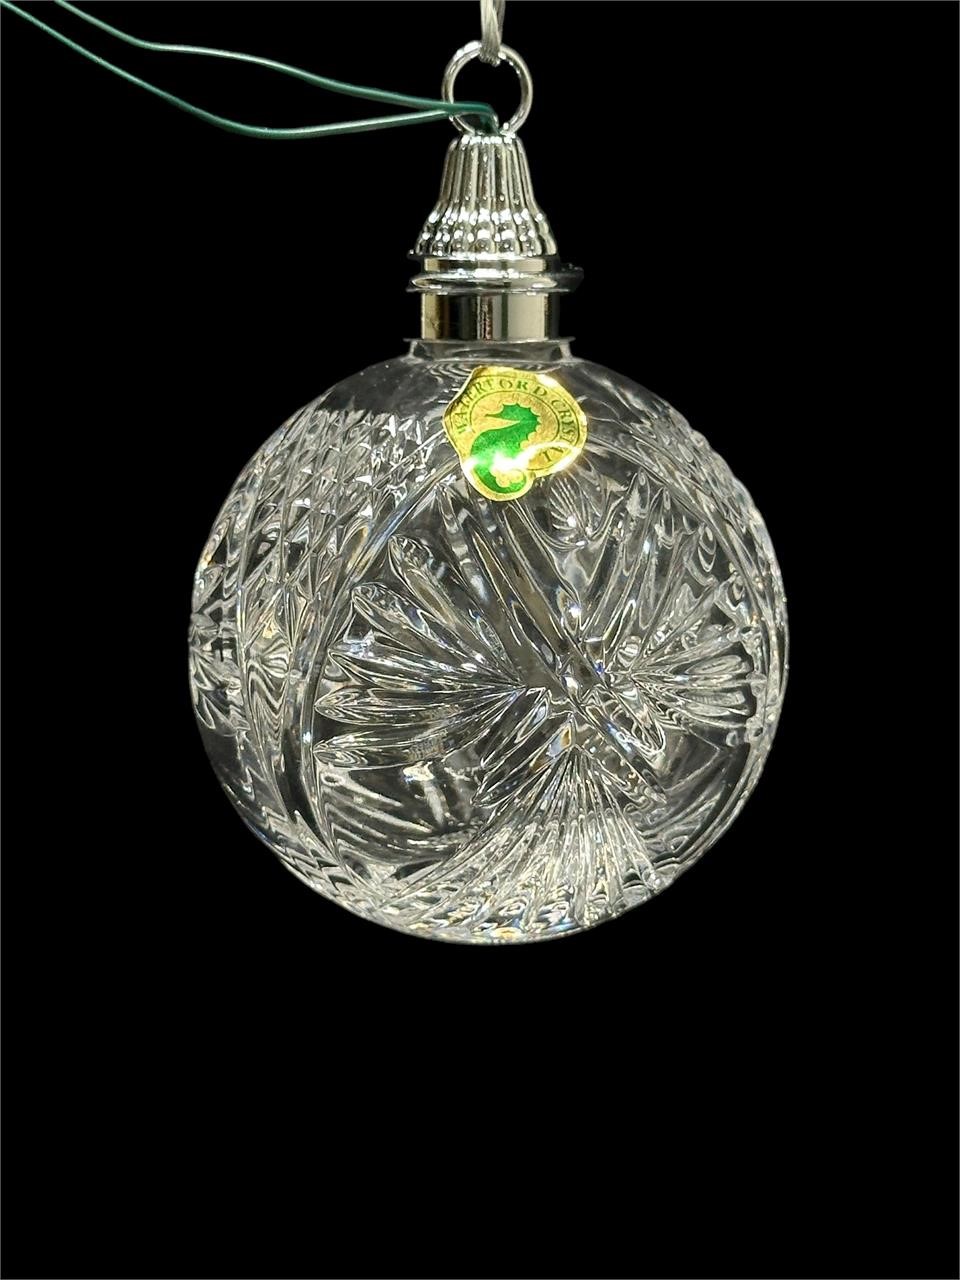 Waterford Crystal Ball Ornament w/ LED Light